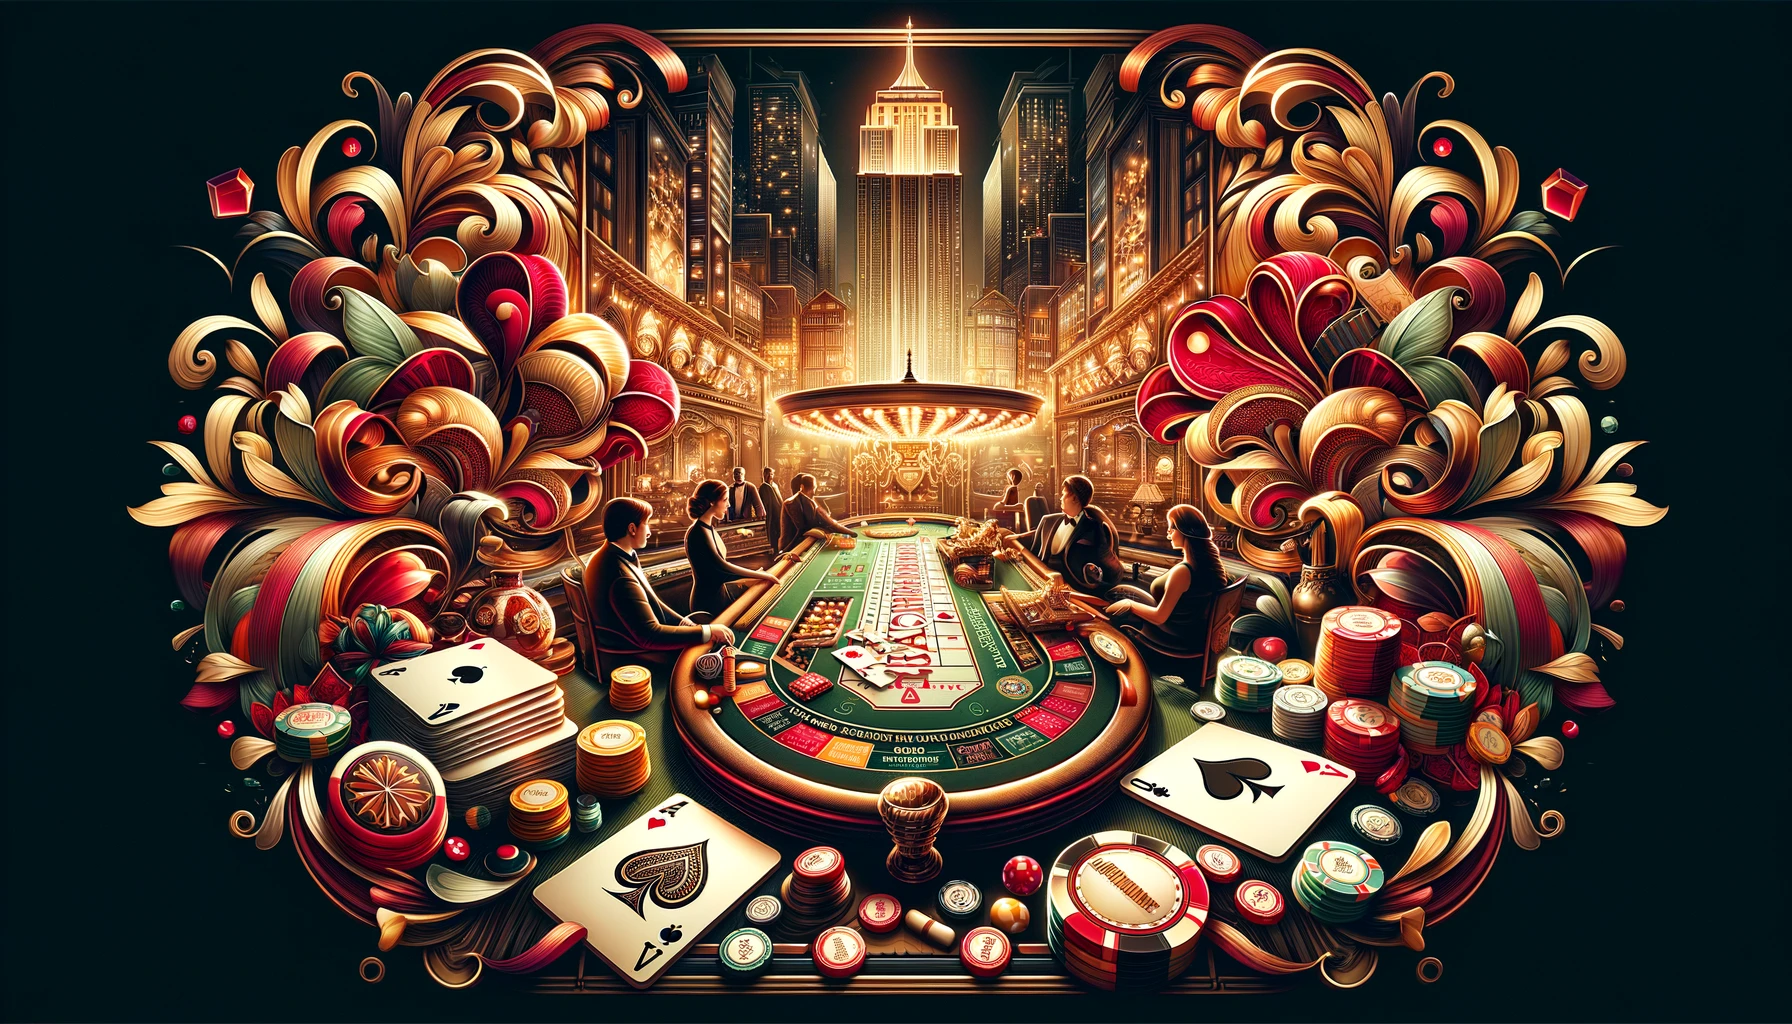 DALL·E 2024-02-21 14.13.56 - Create a wide promotional image for 'Rummy Glee' featuring the Baccarat game theme, sized at 512x288 pixels. The image should capture the sophisticati